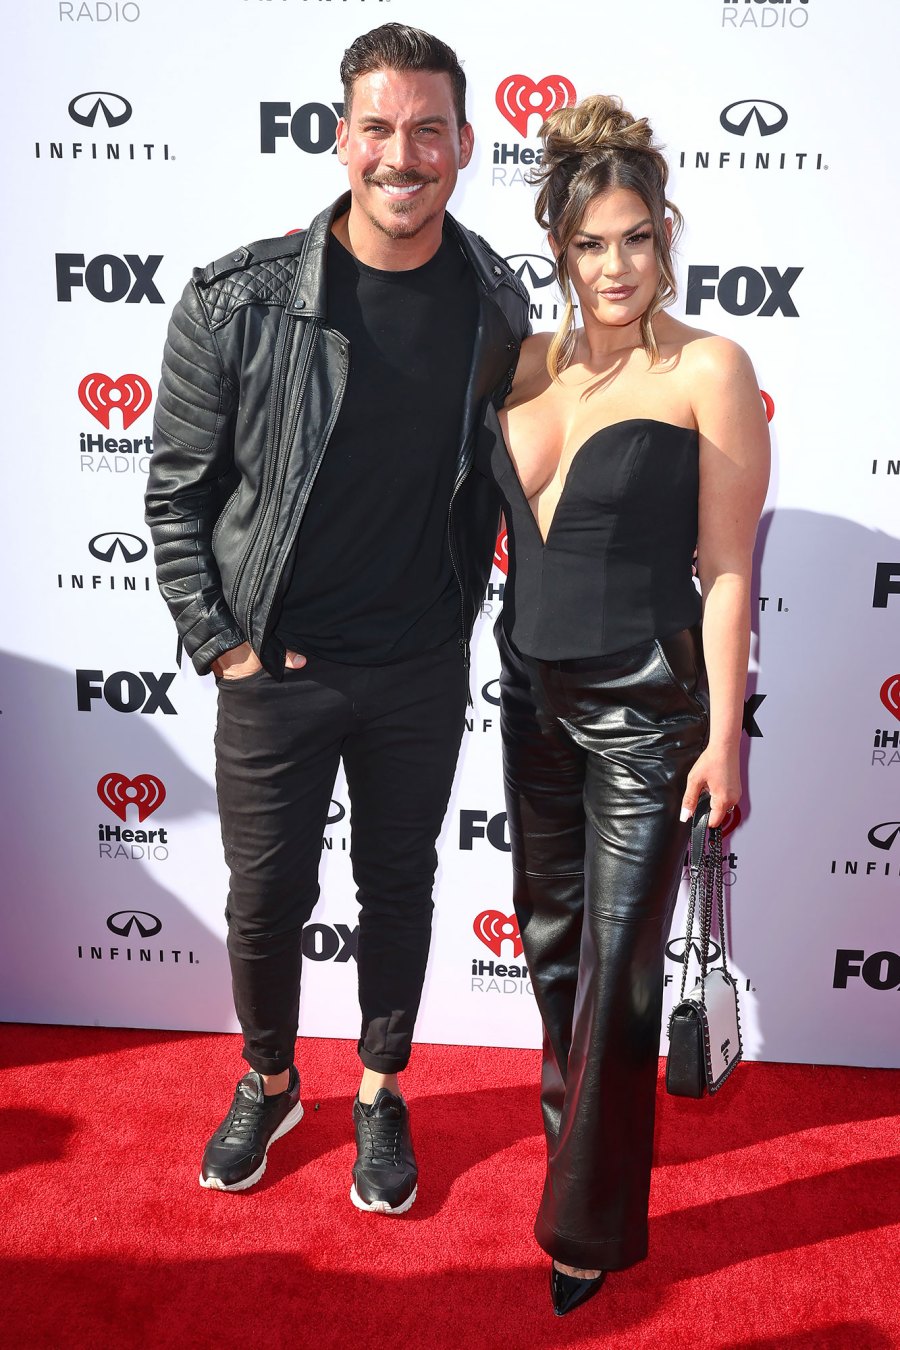 Jax Taylor and Brittany Cartwright Ups and Downs Over the Years